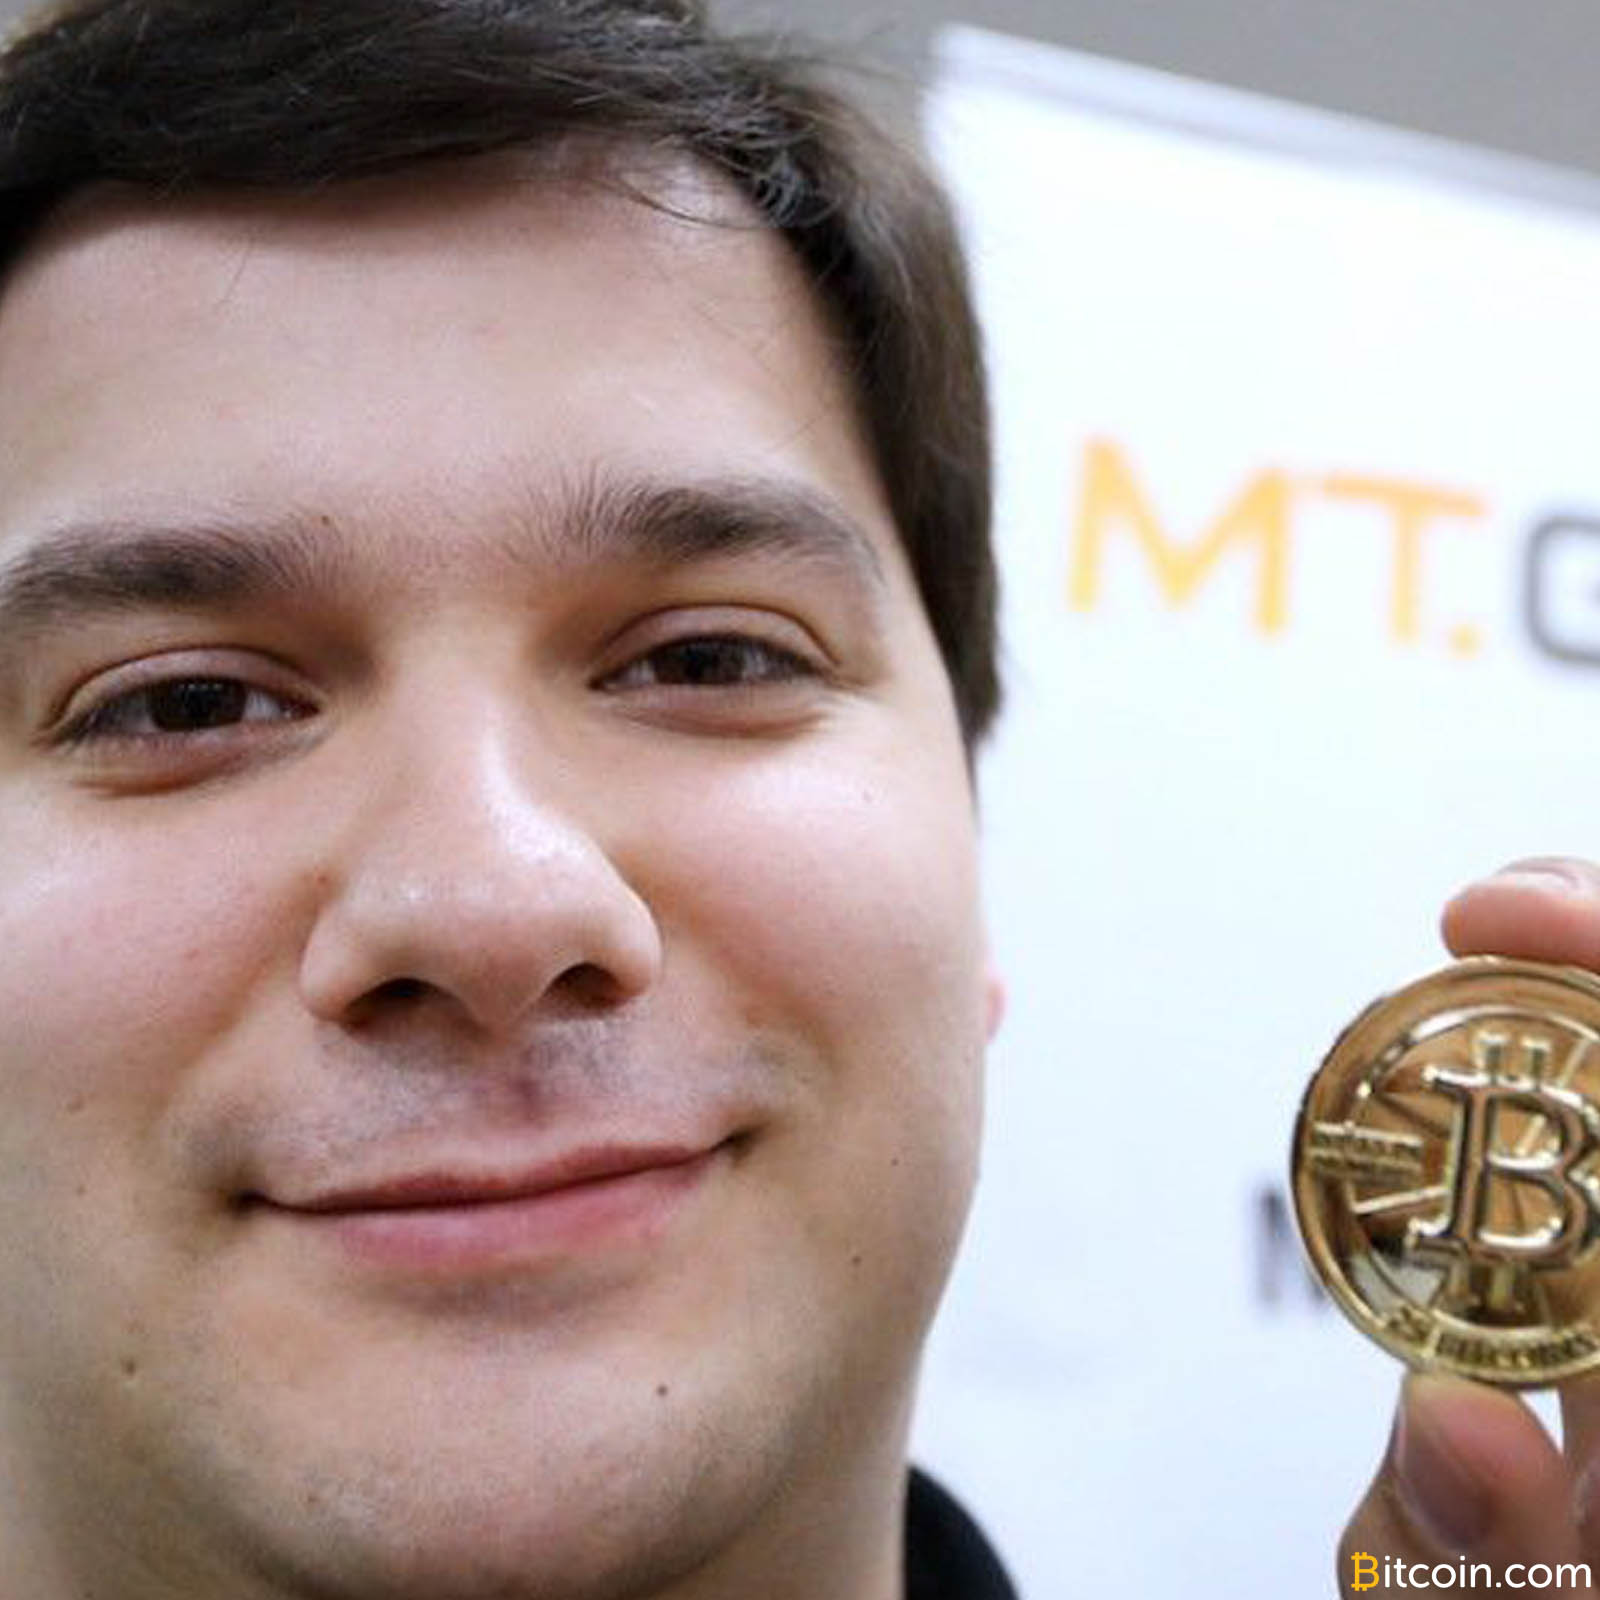 The Only Winner in the Mt Gox Trial is Mark Karpeles